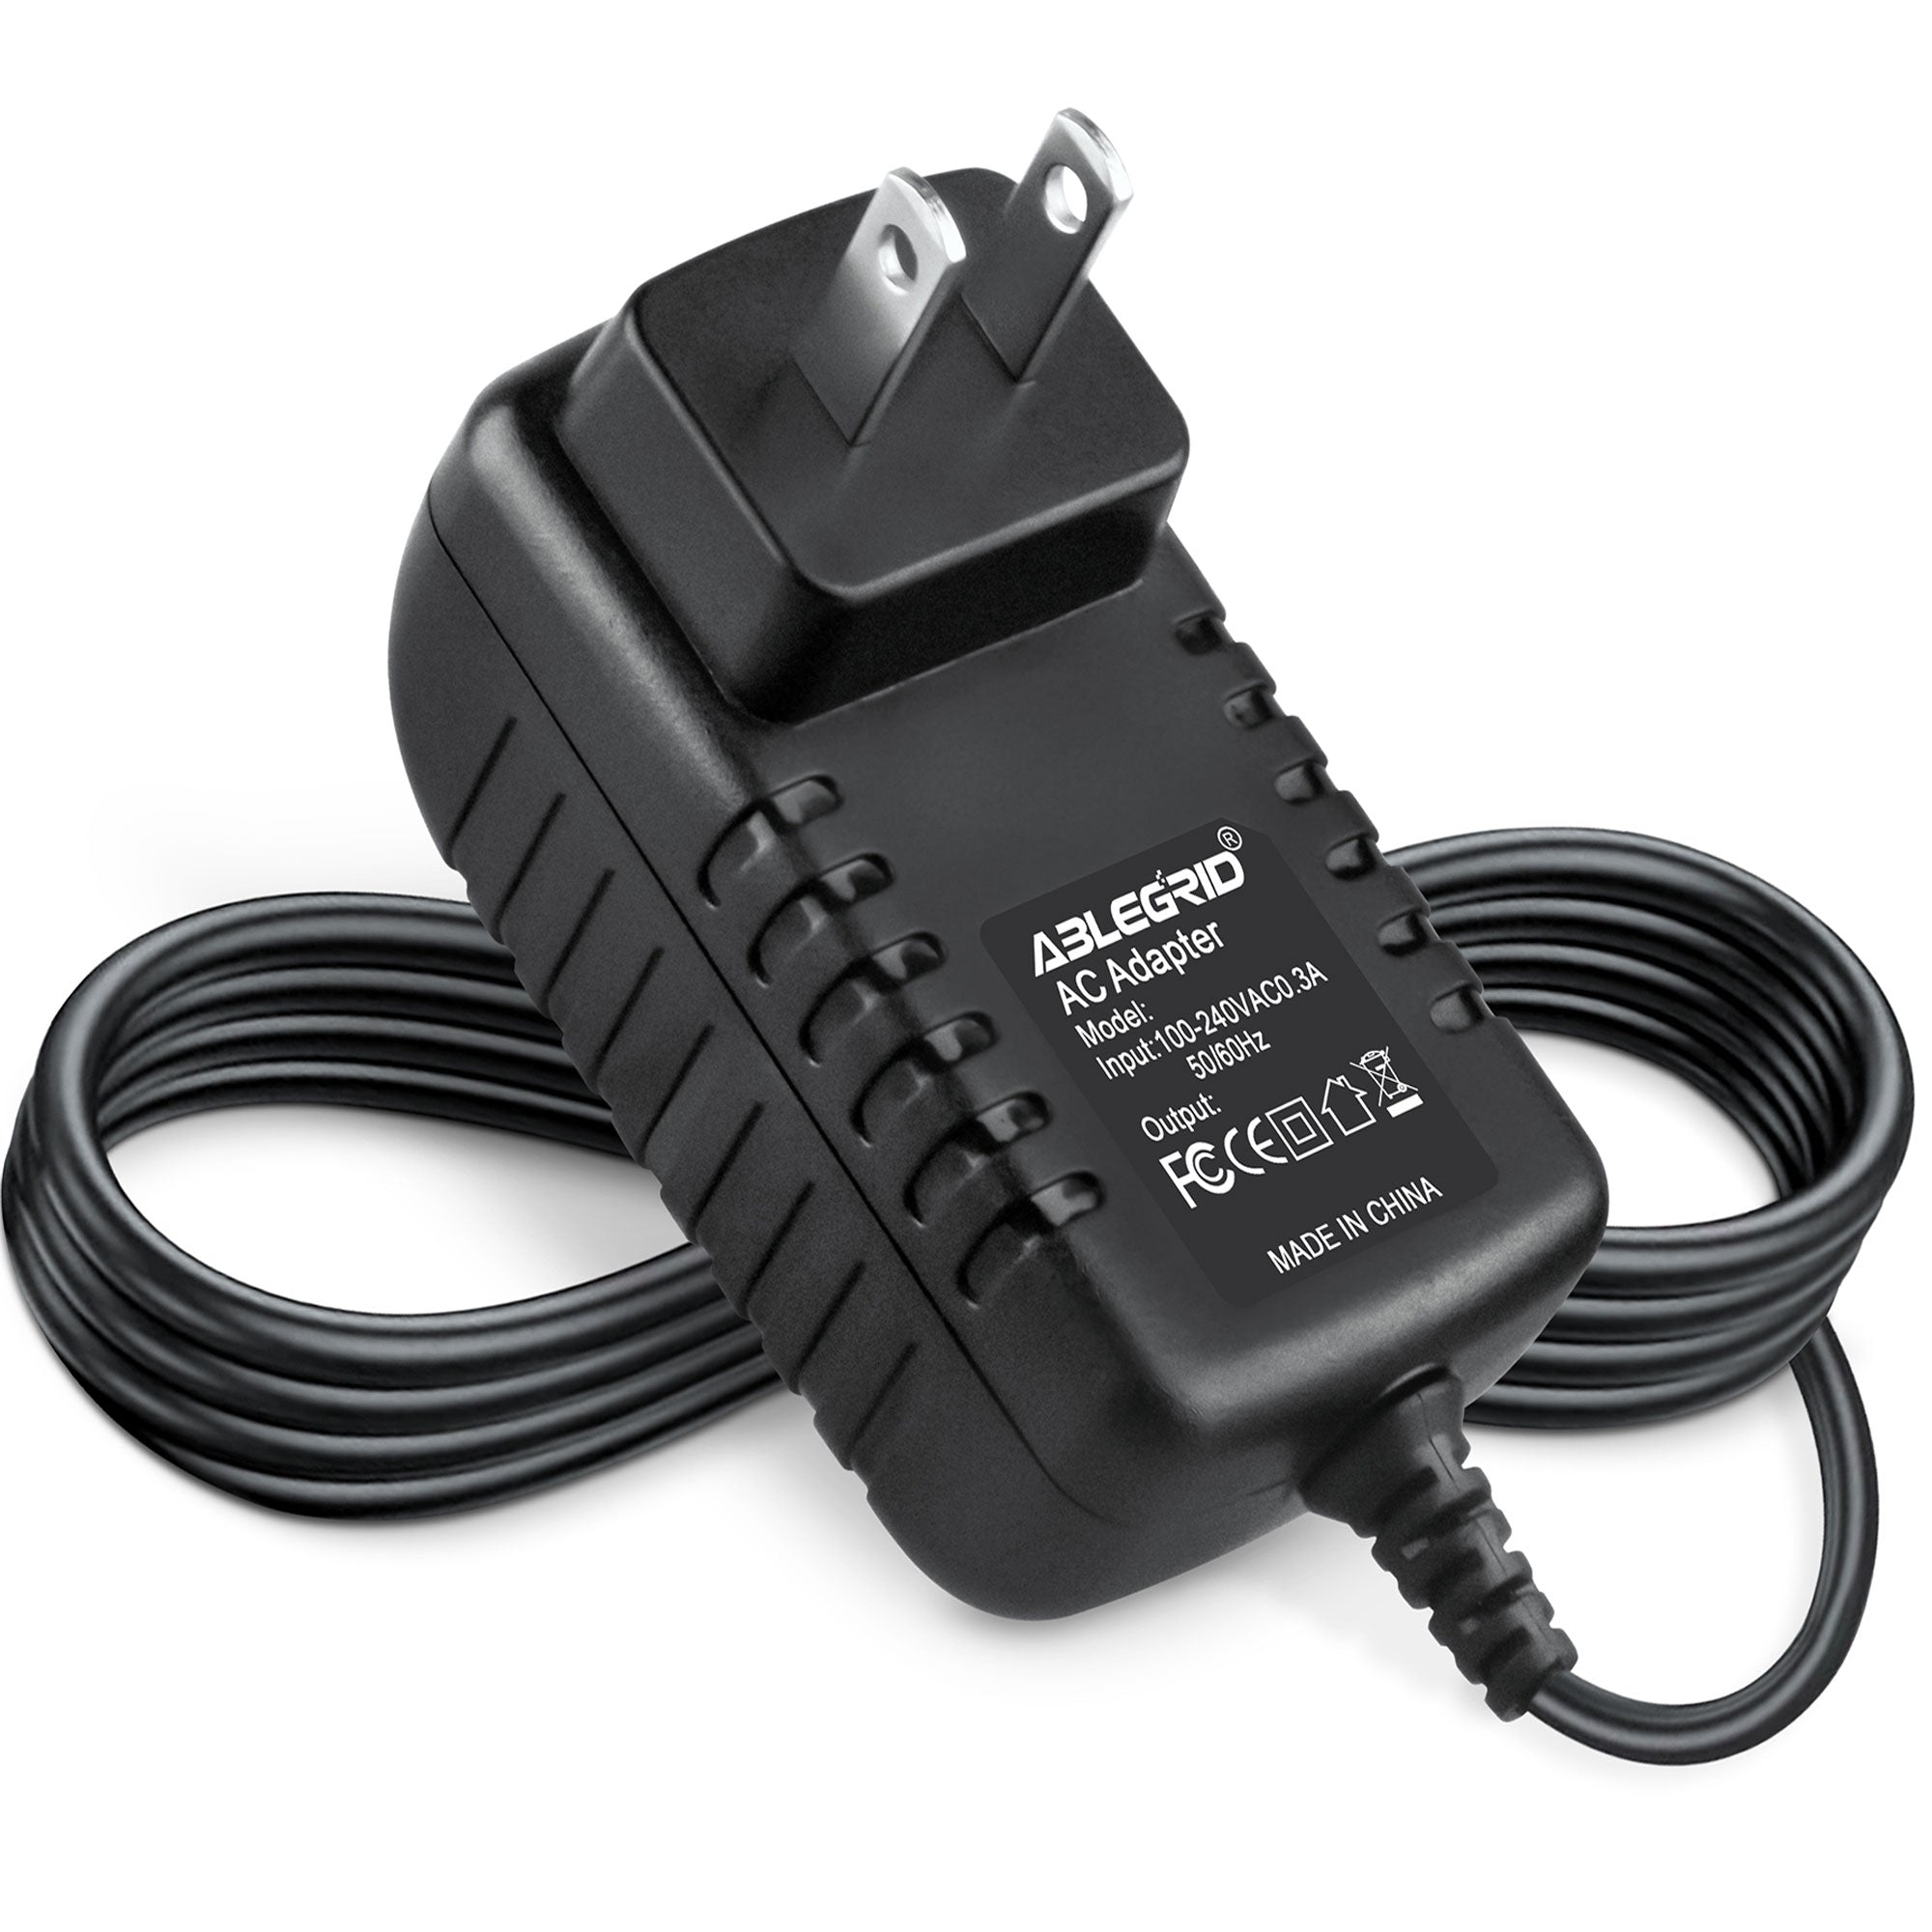 Min Stuepige Midlertidig AbleGrid 12V AC / DC Adapter For Casio PX-130 Privia PX-135 PX-130 Key –  Ablegrid.com